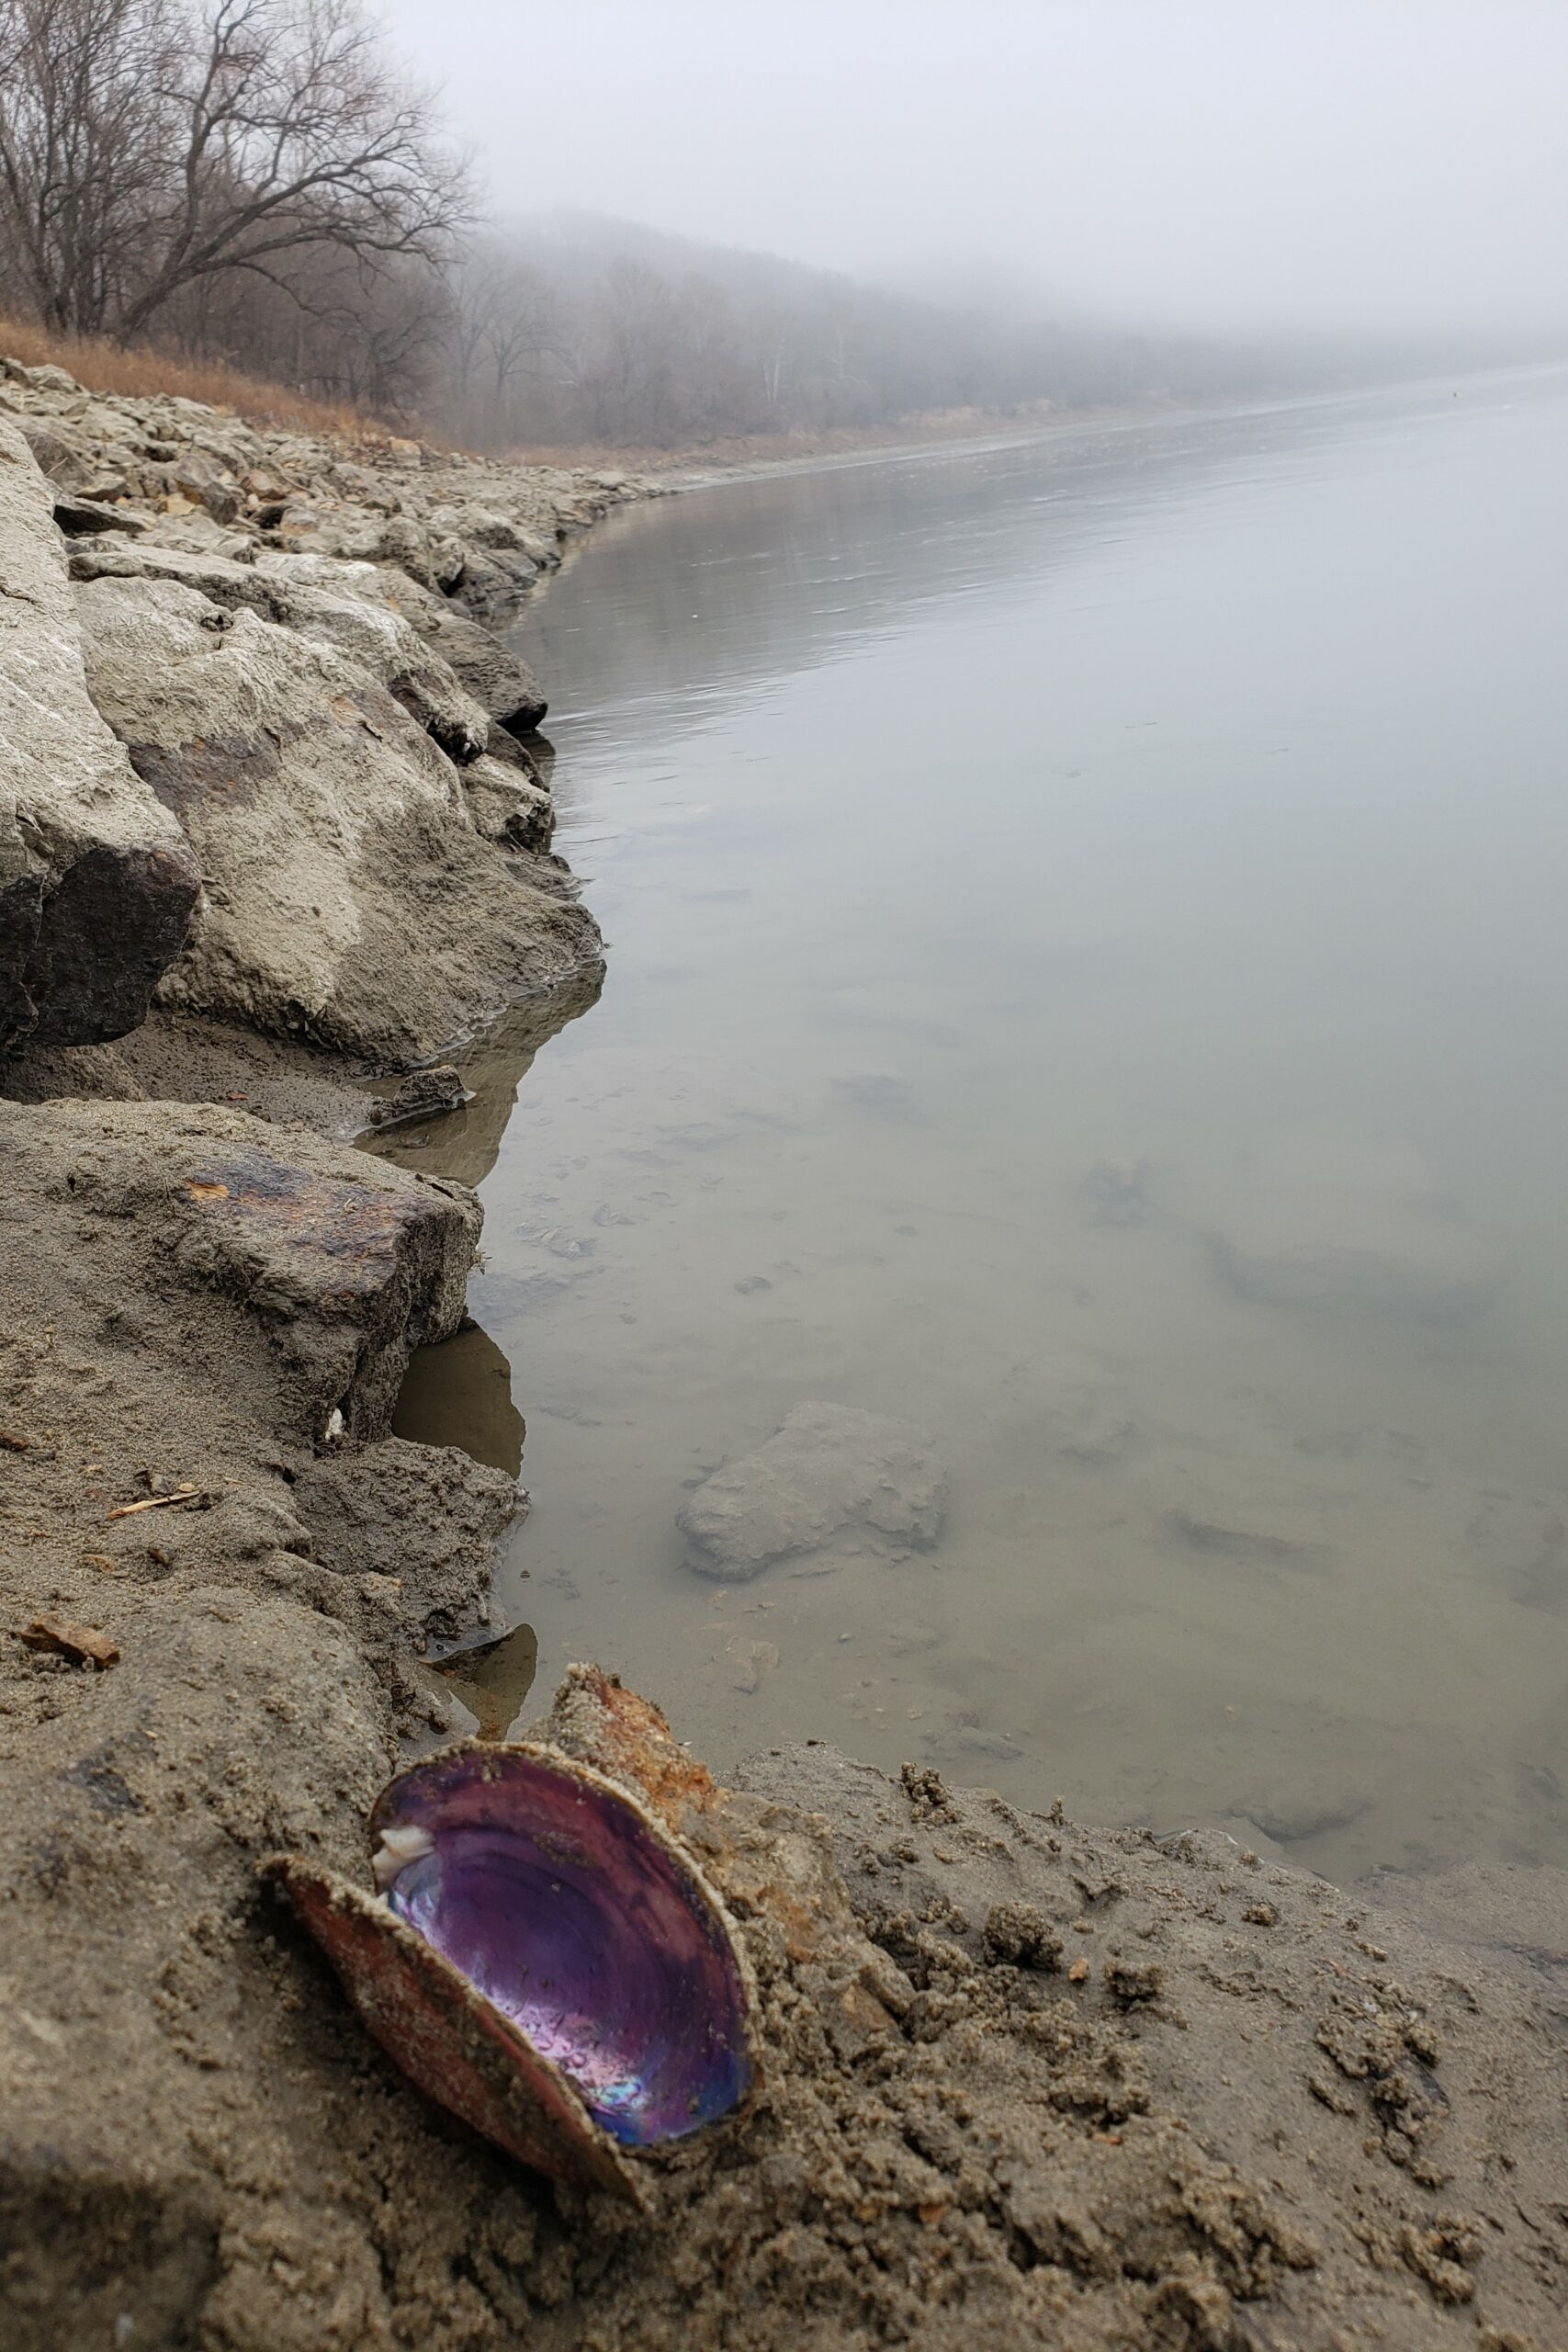 An empty mussel shell in the foreground of a rocky coastal embankment and the water is not very clear.